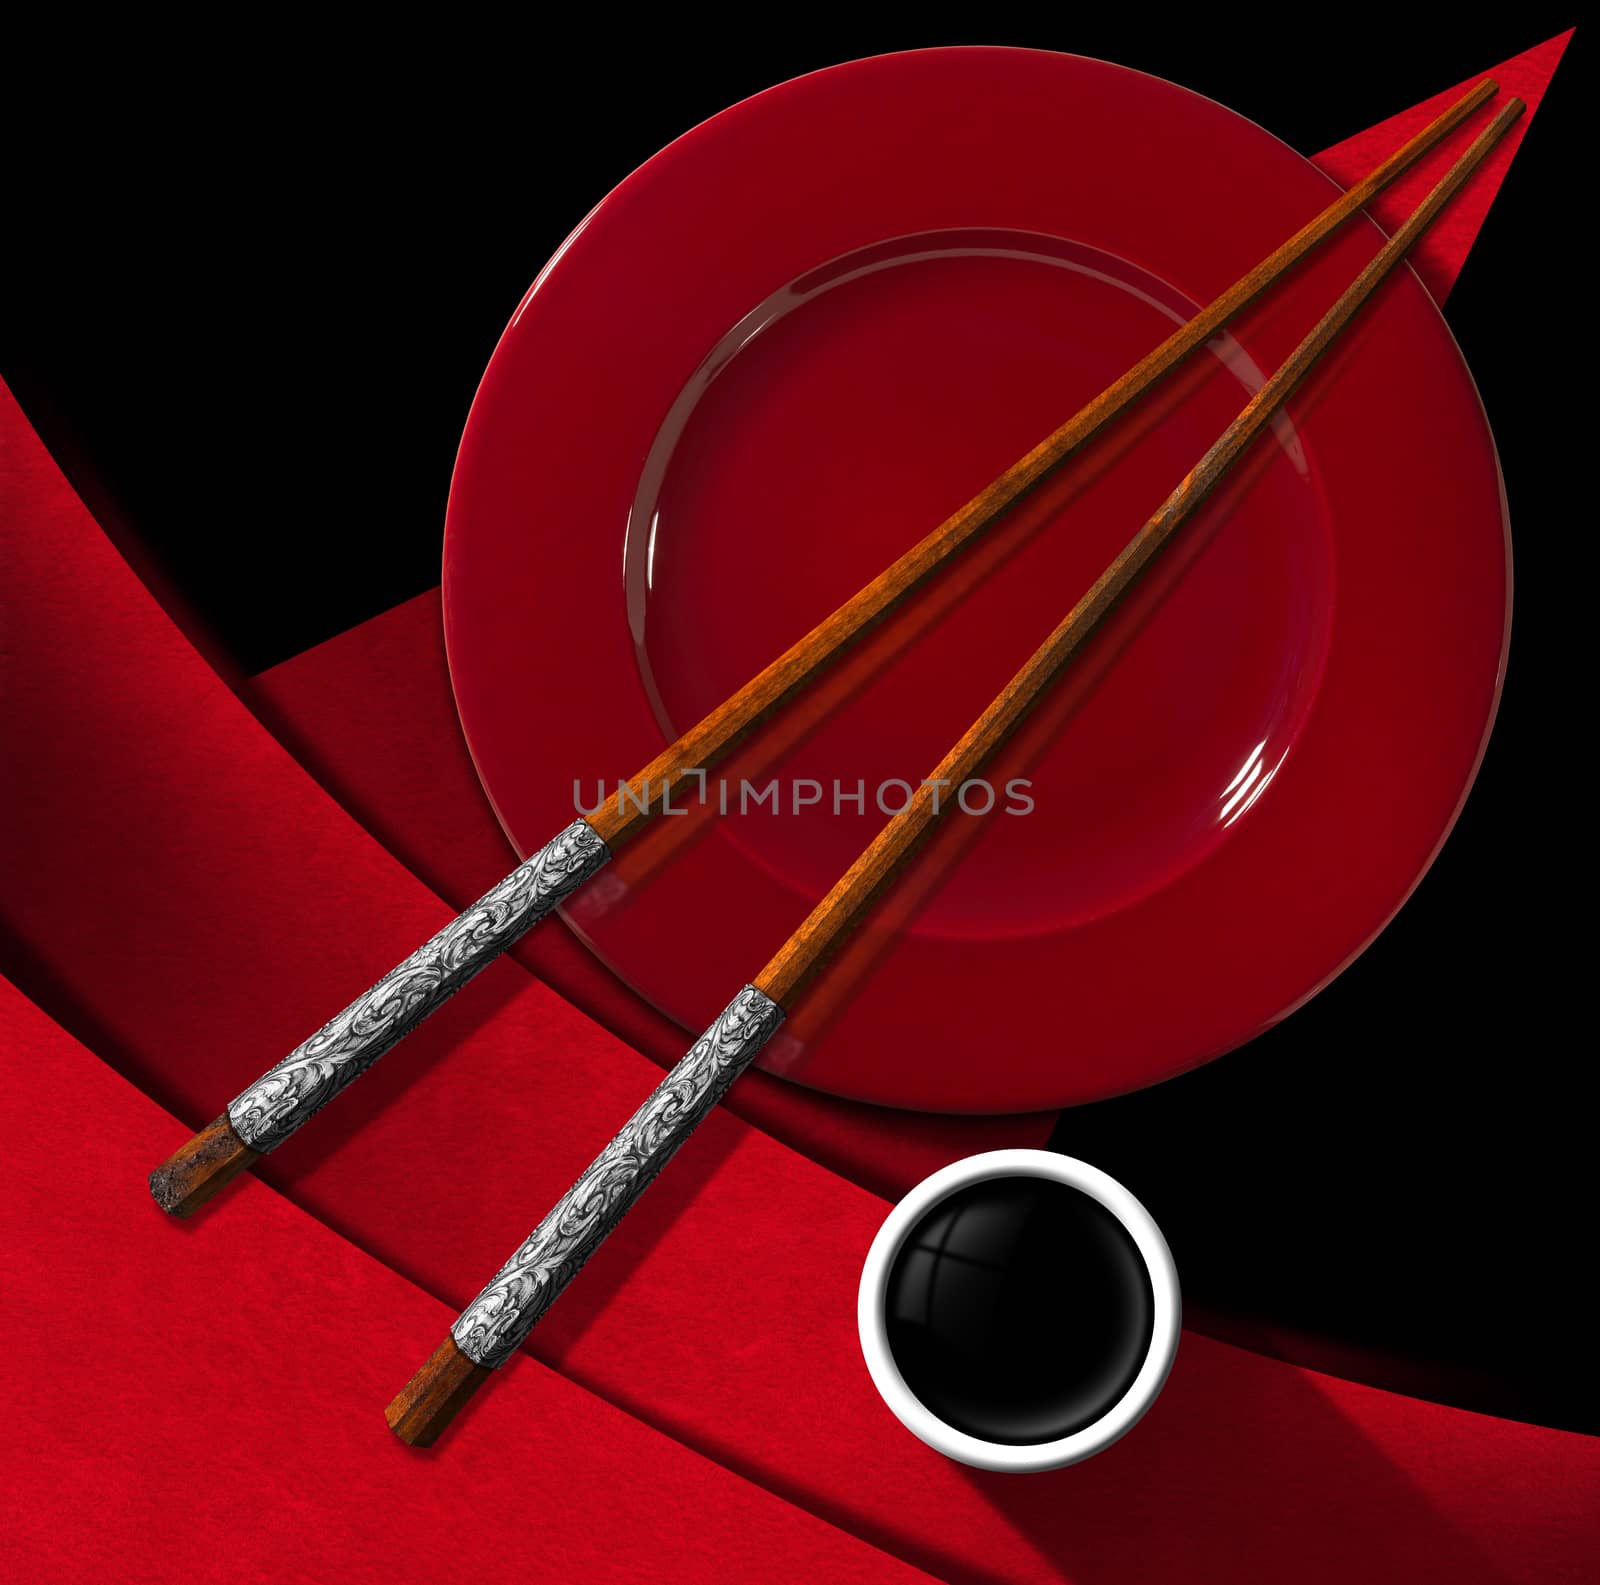 Template for an Asian menu with wooden and silver chopsticks, red plate and a bowl of sauce. On a black and red background with geometric shapes